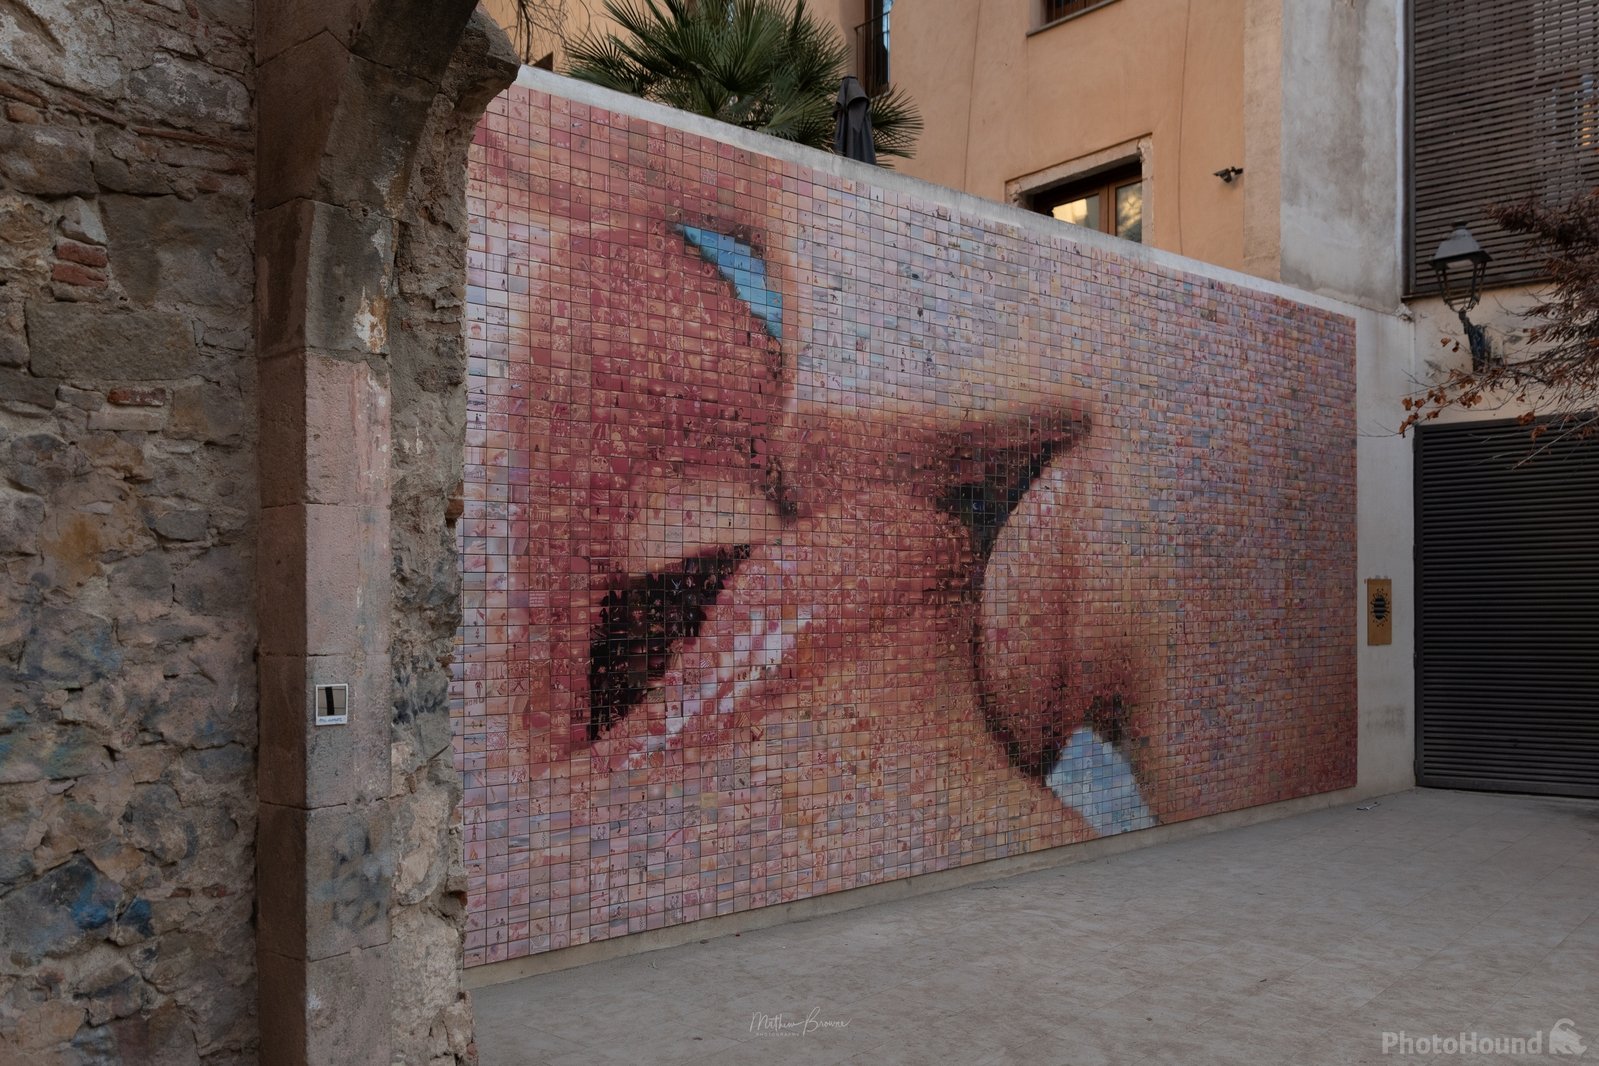 Image of The World Begins With Every Kiss (The Kiss Mural) by Mathew Browne